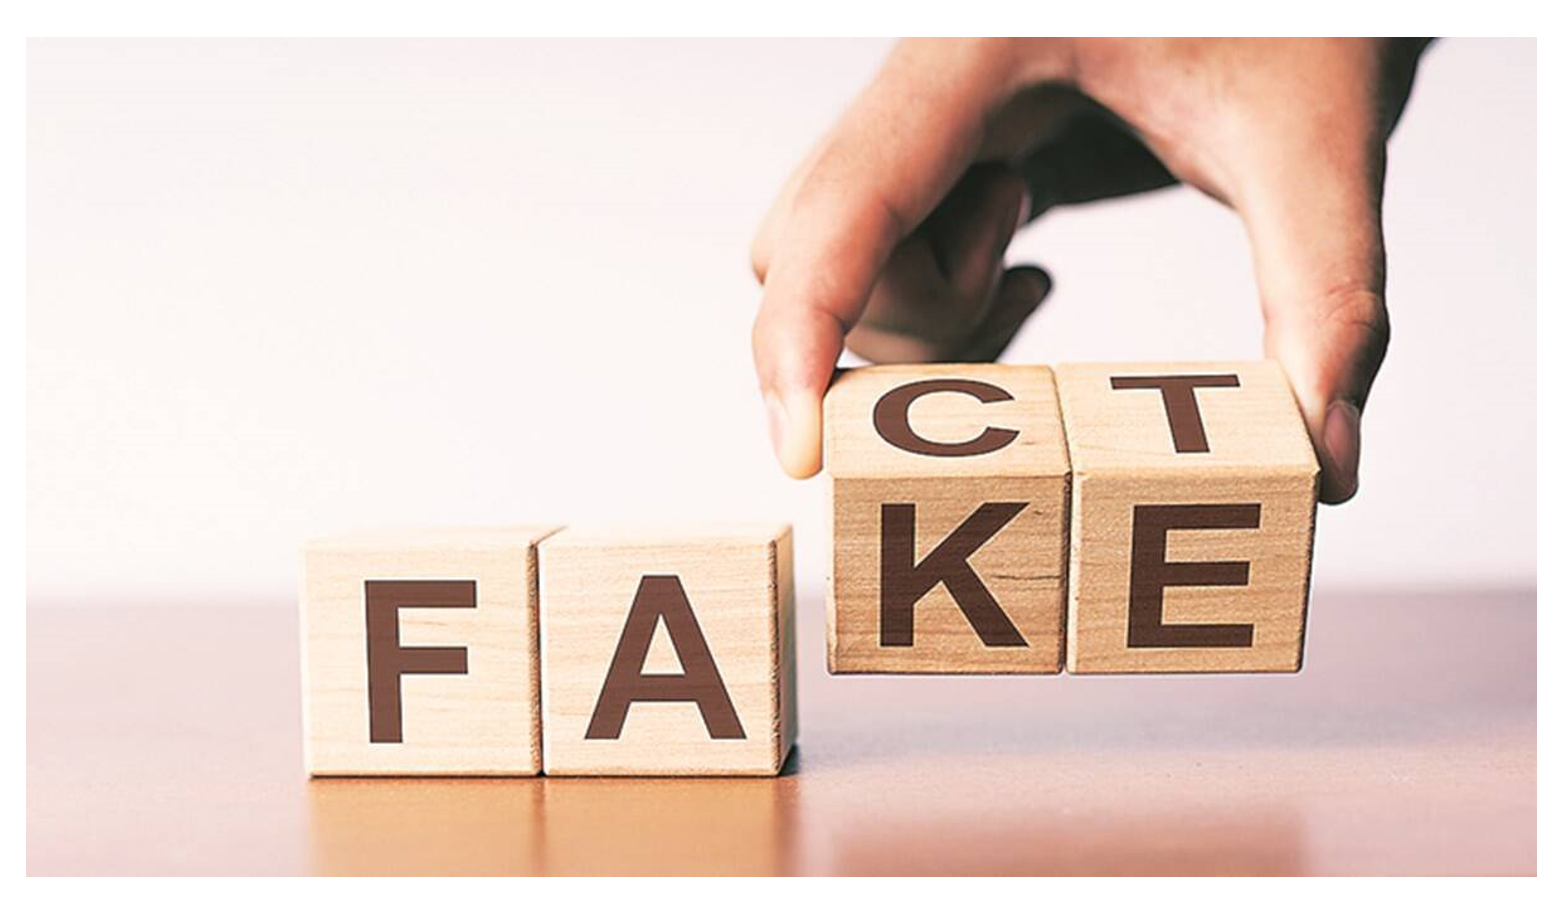 Fake Chat = Fake News. Reputation is what ChatGPT says about you ...